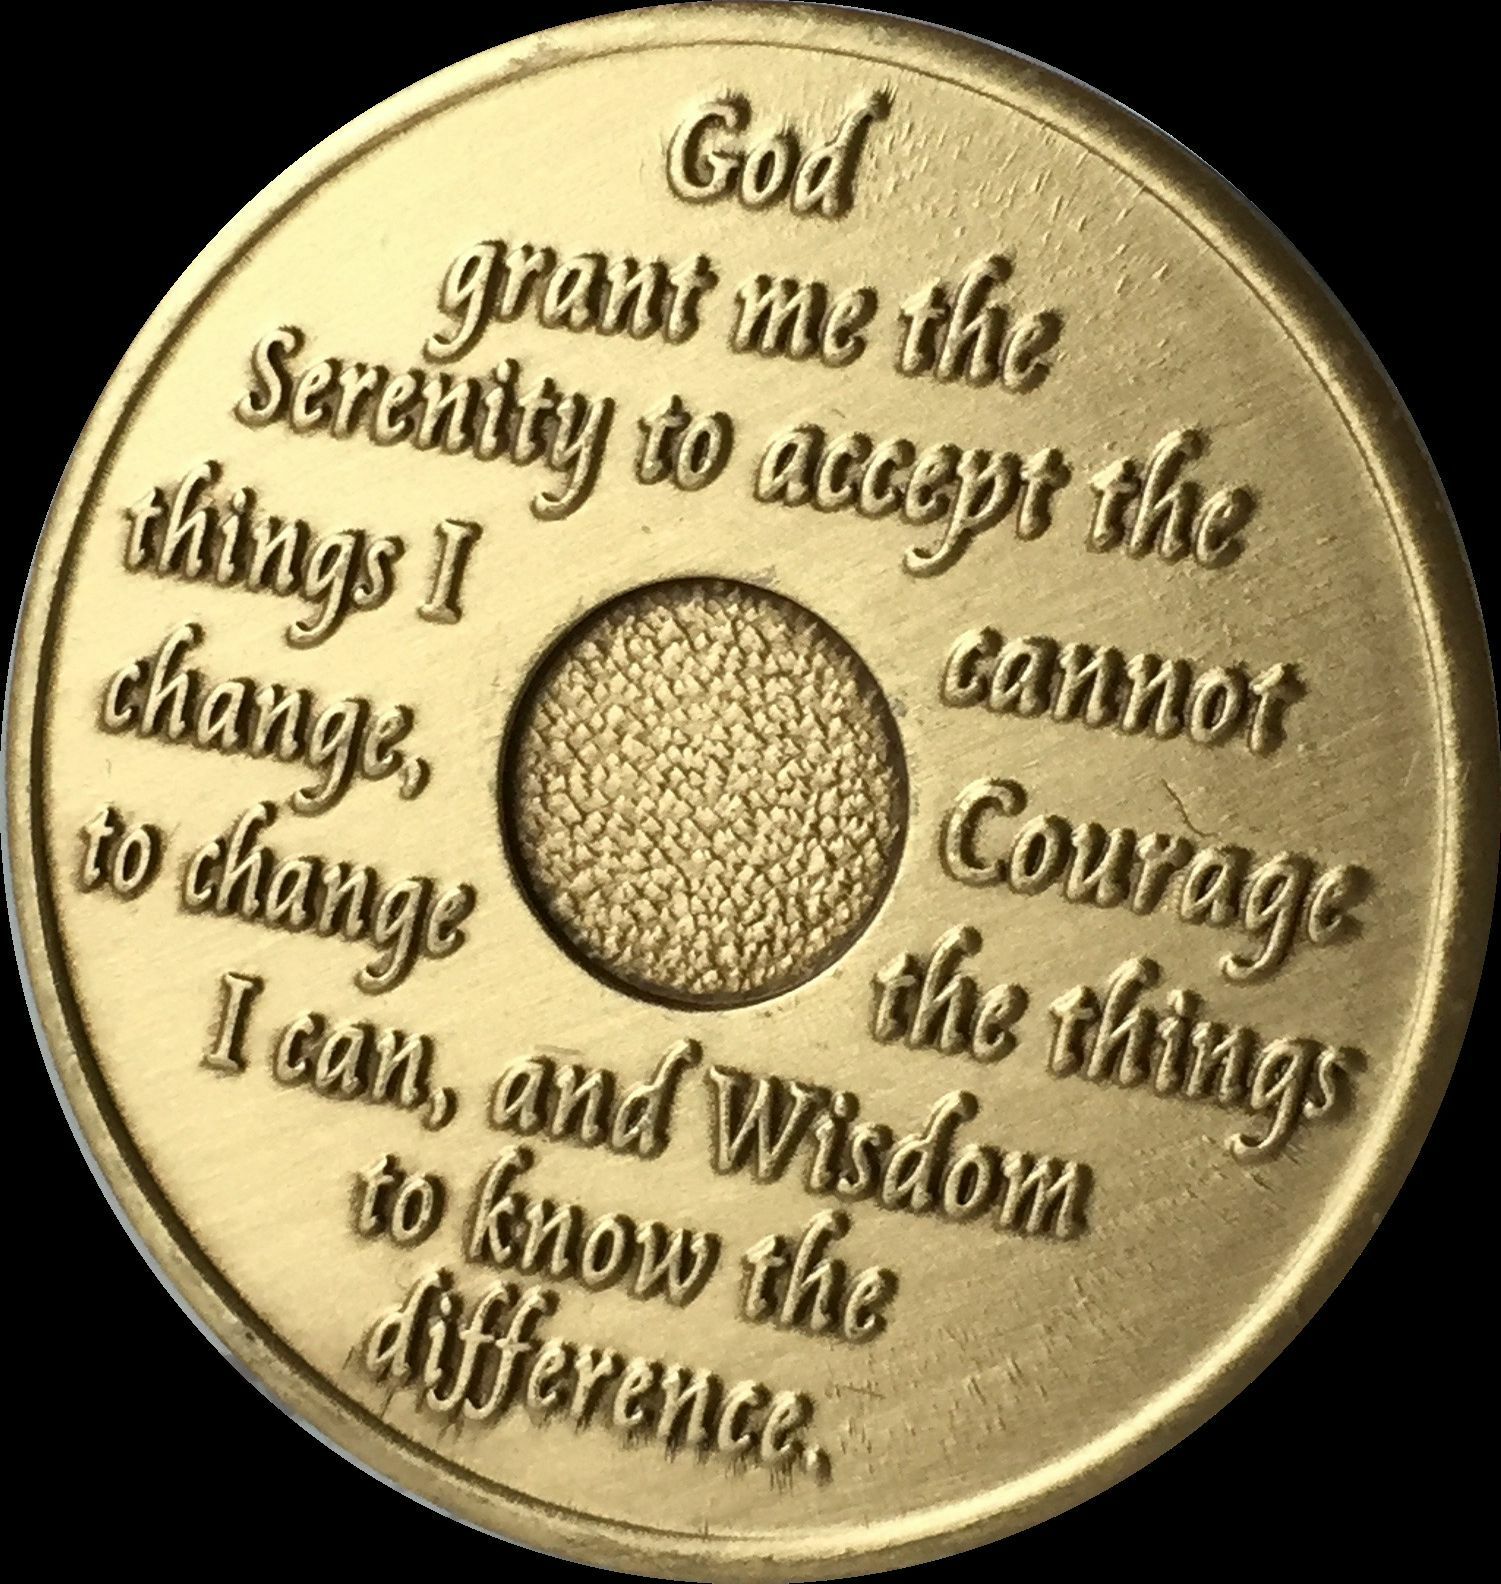 Keep Coming Back Swoosh Serenity Prayer Bronze Recovery Medallion Coin ...